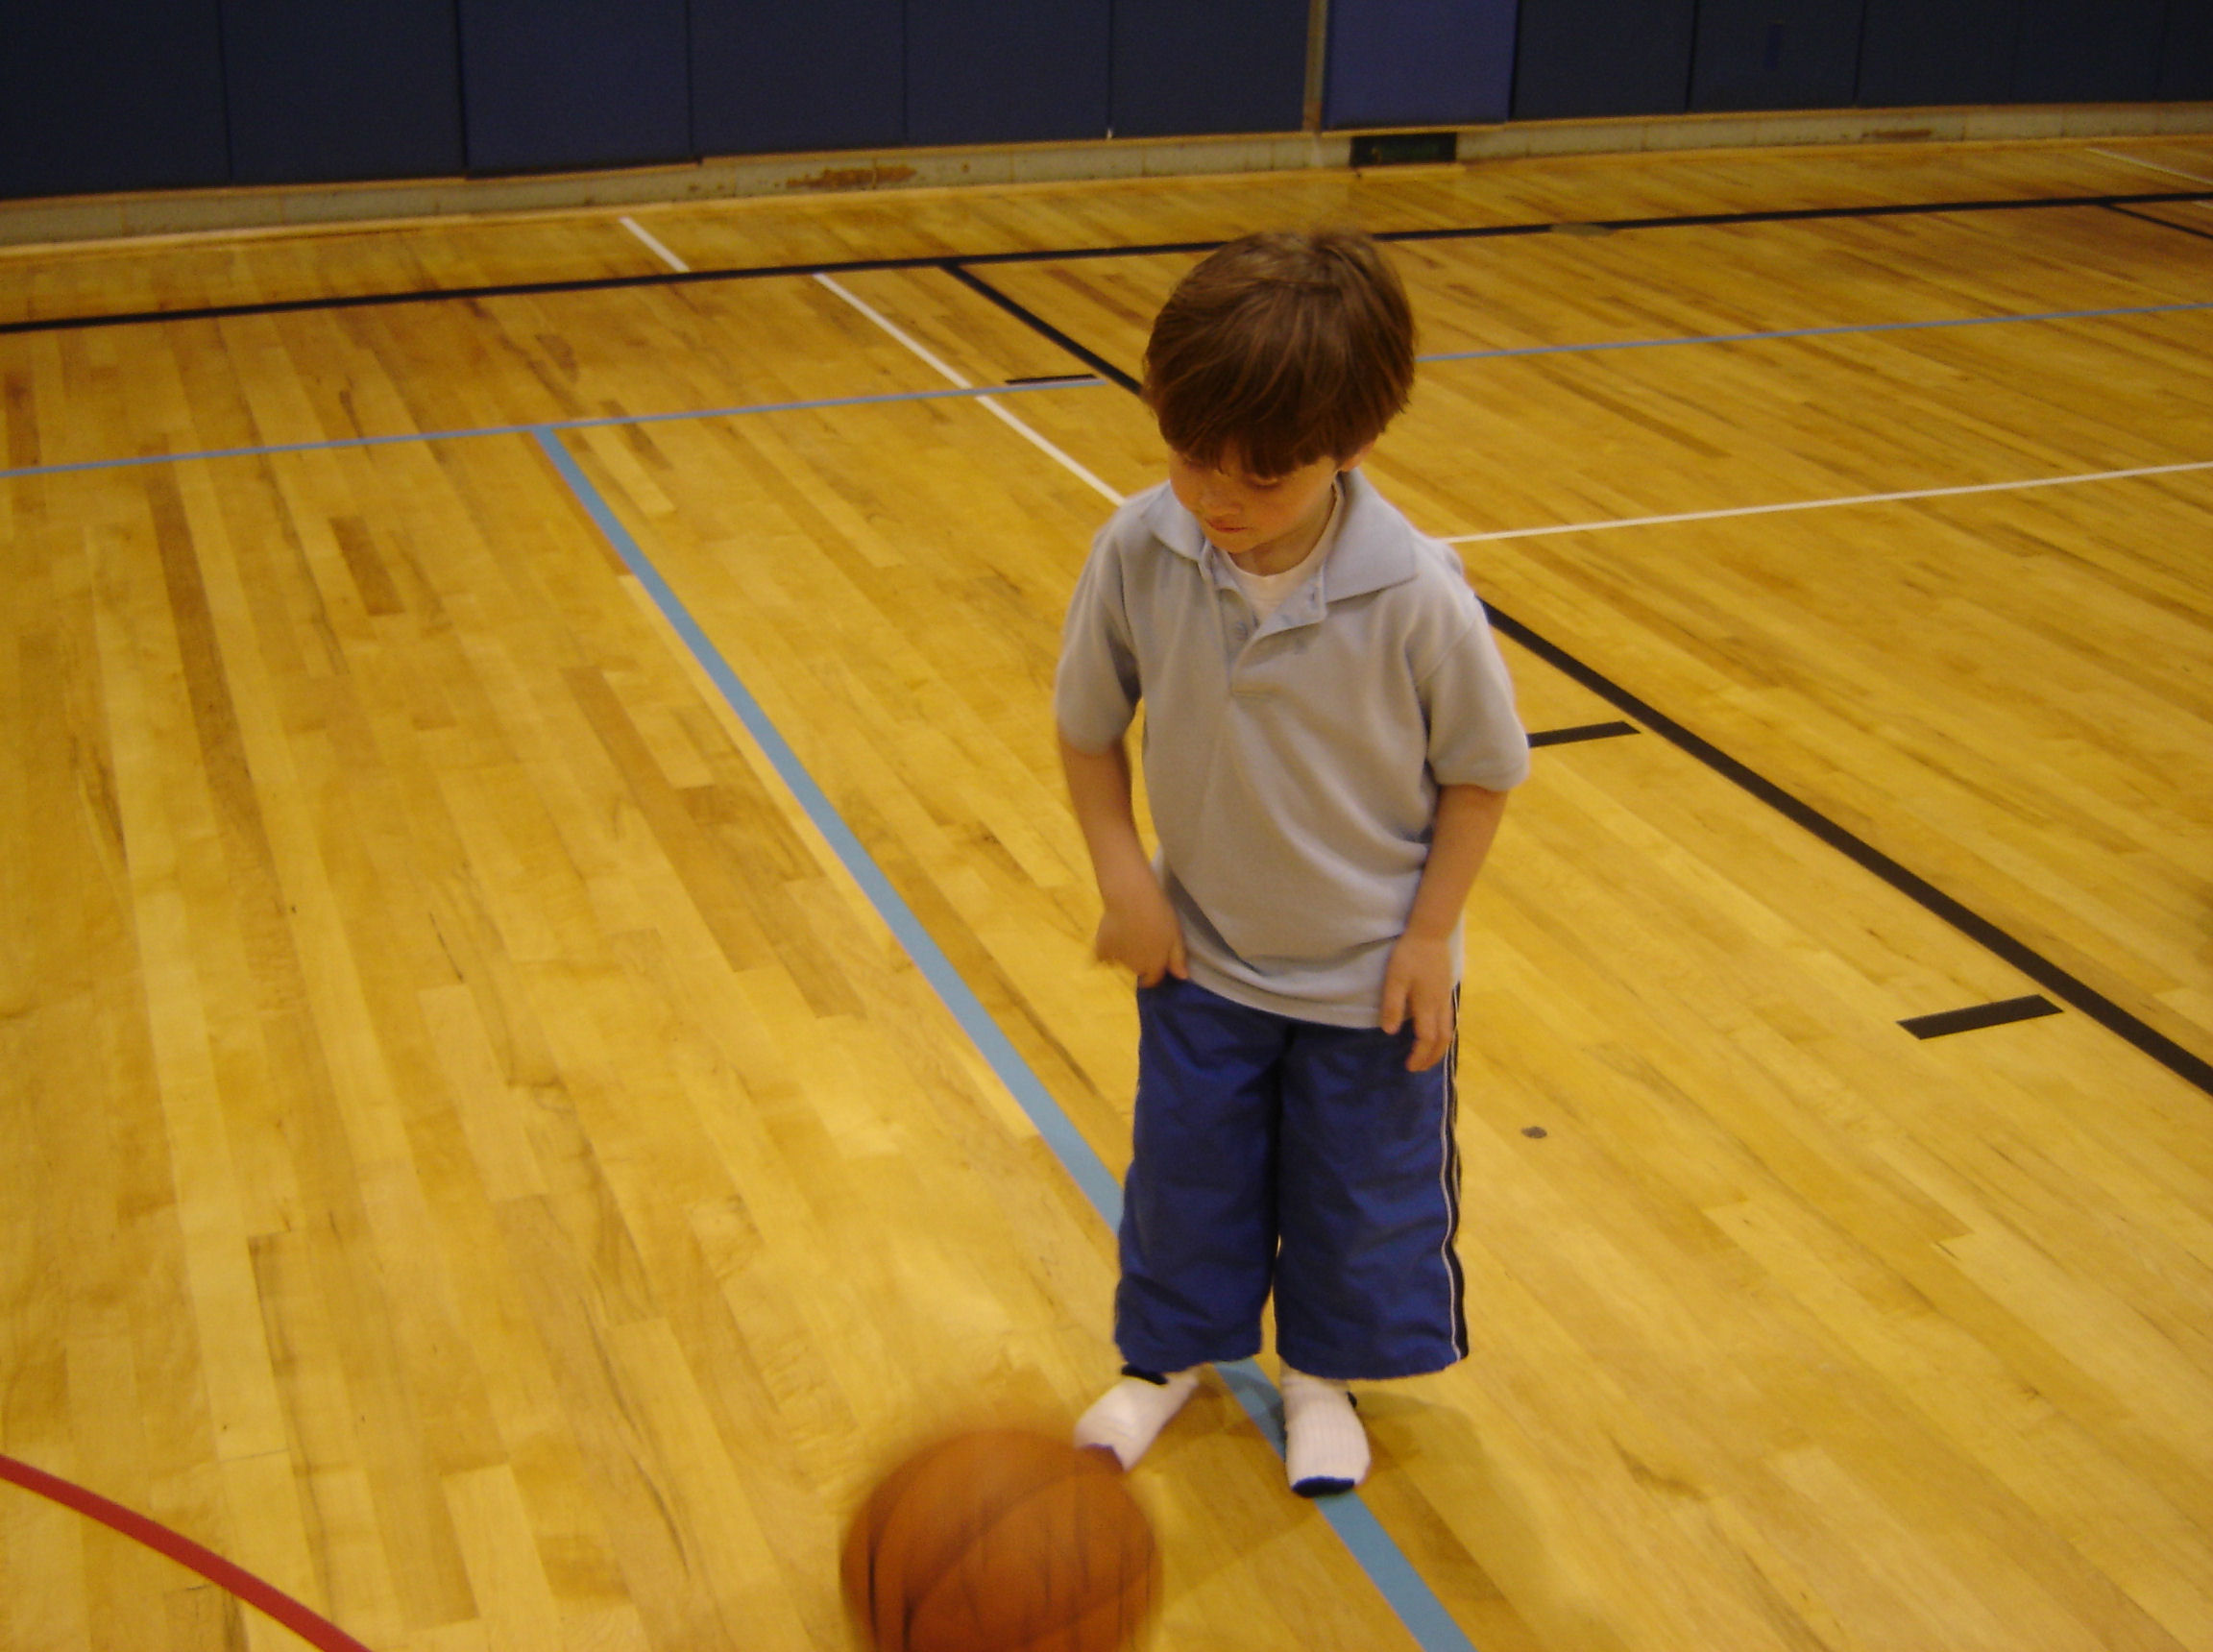 Ball in Motion at the Y